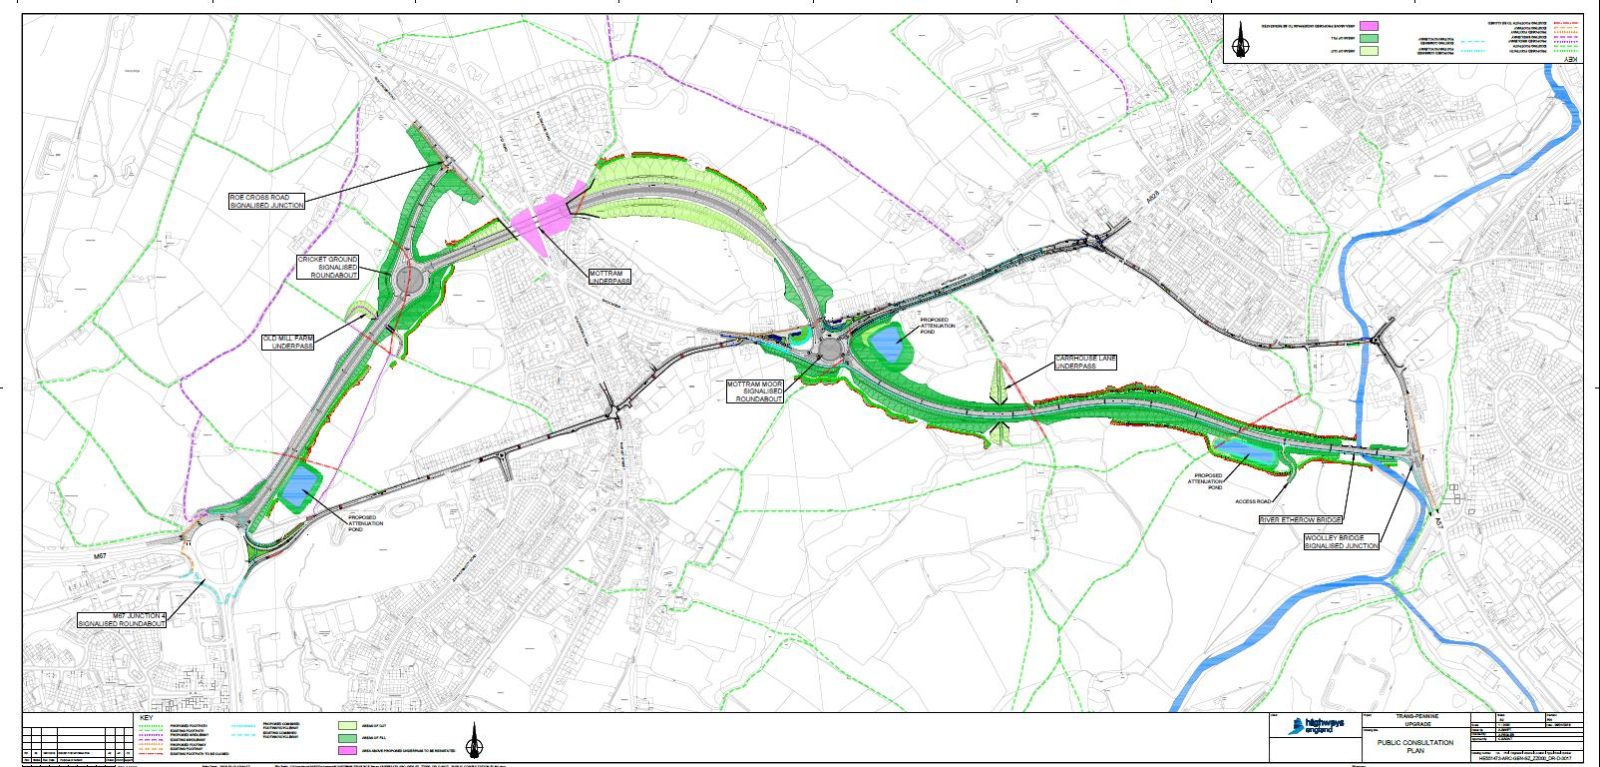 The latest map for the planned bypass